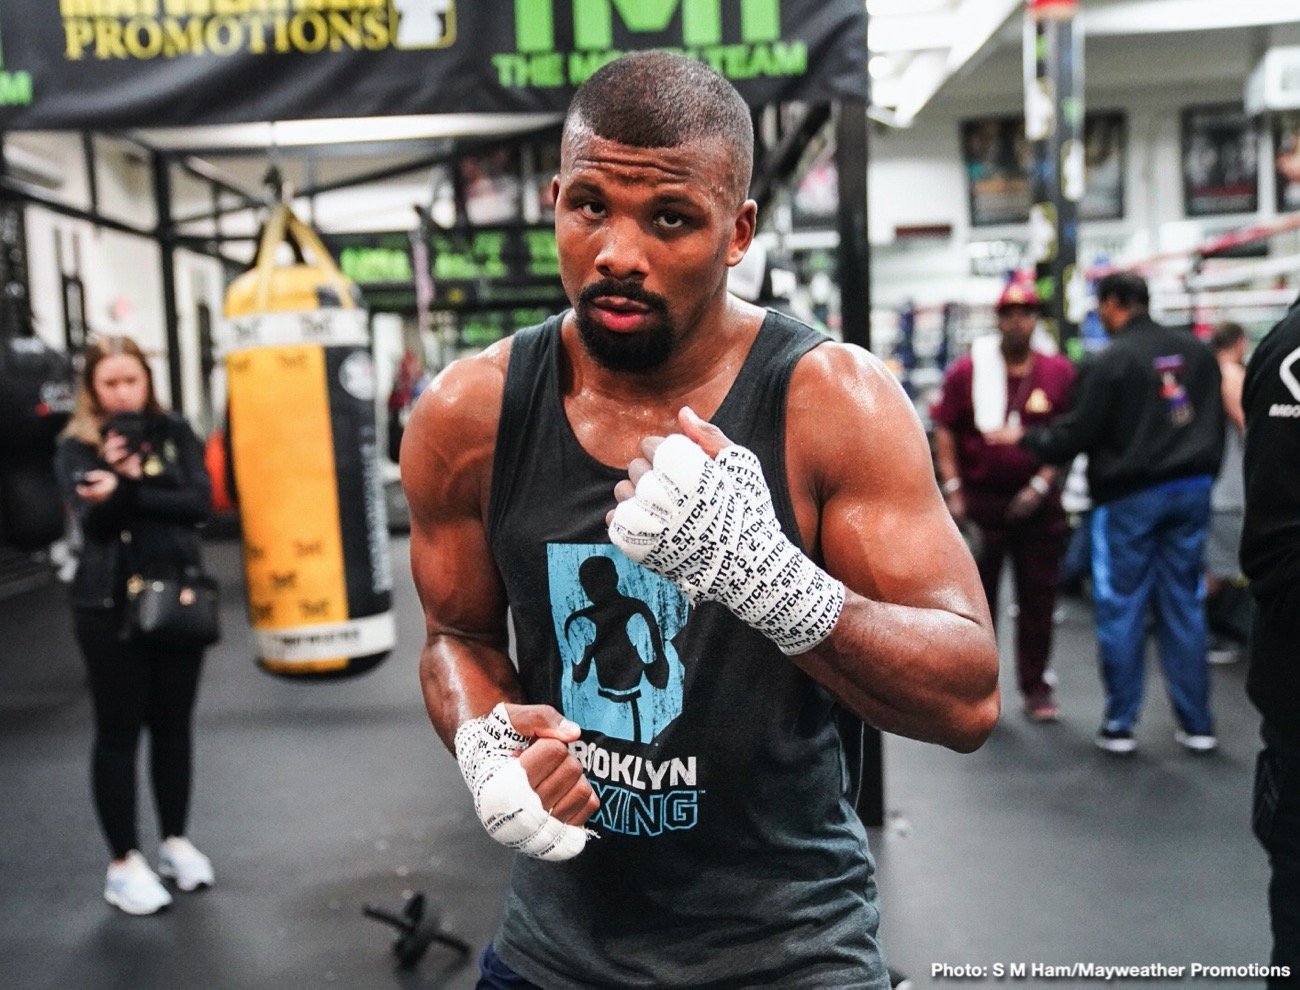 Badou Jack: “I’m The Real Main Event On Sunday. People Who Know Boxing Know That”